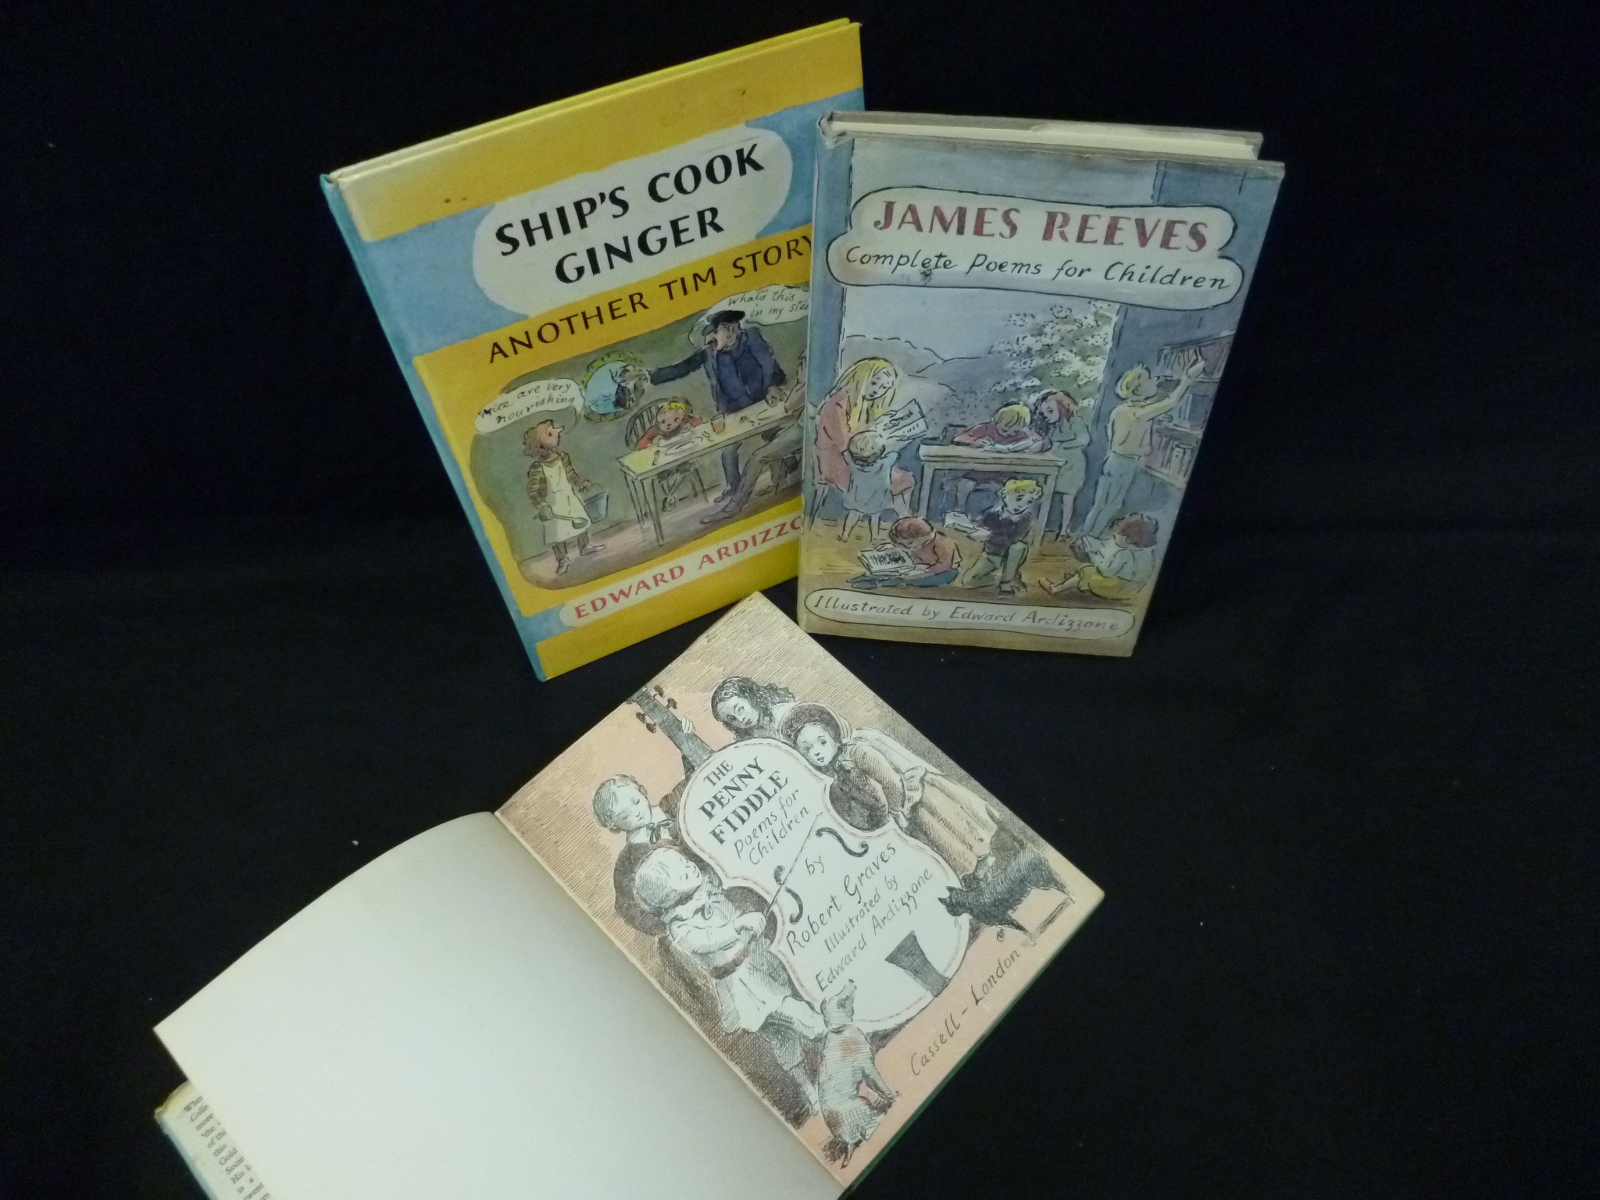 EDWARD ARDIZZONE: SHIP?S COOK GINGER, 1977, 1st edn, 4to, orig pict lam bds + ROBERT GRAVES: THE